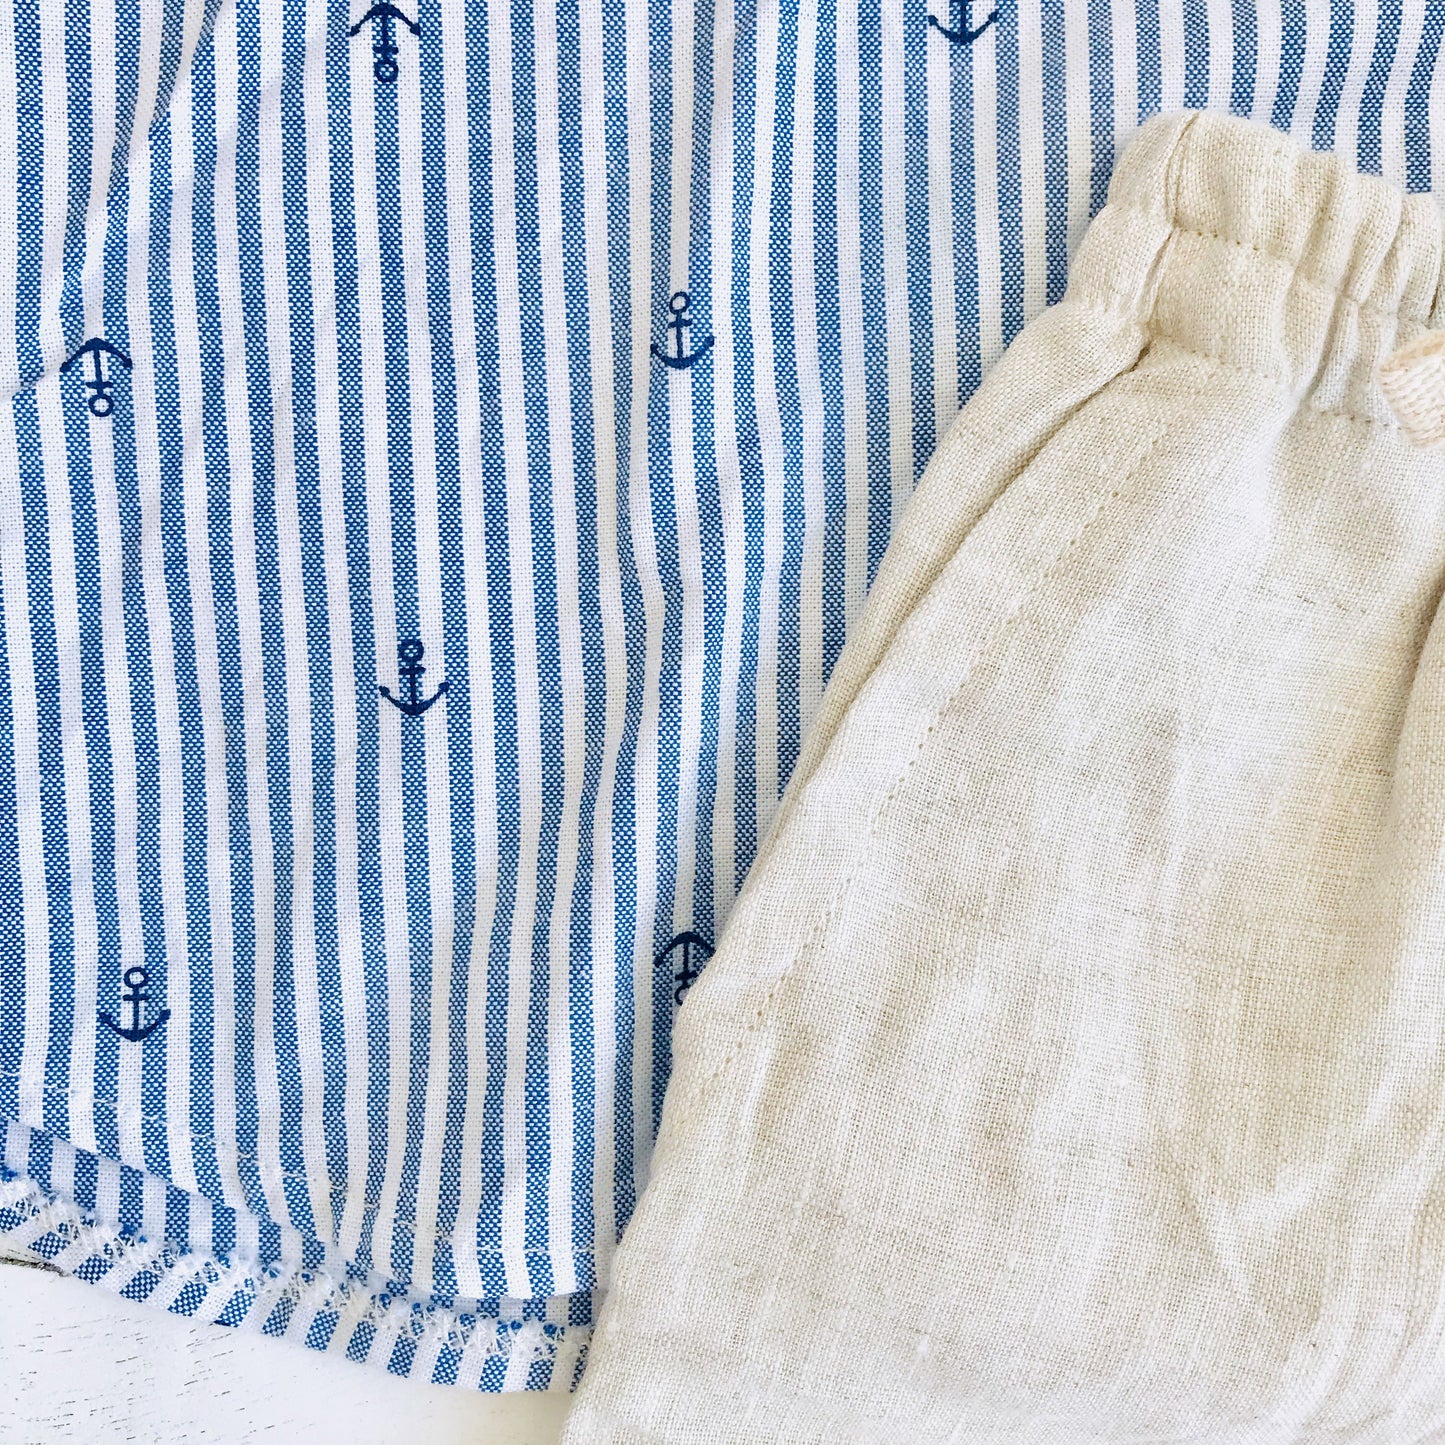 Maple Top & Shorts in Anchor Stripes and Beige Linen - Lil' Tati